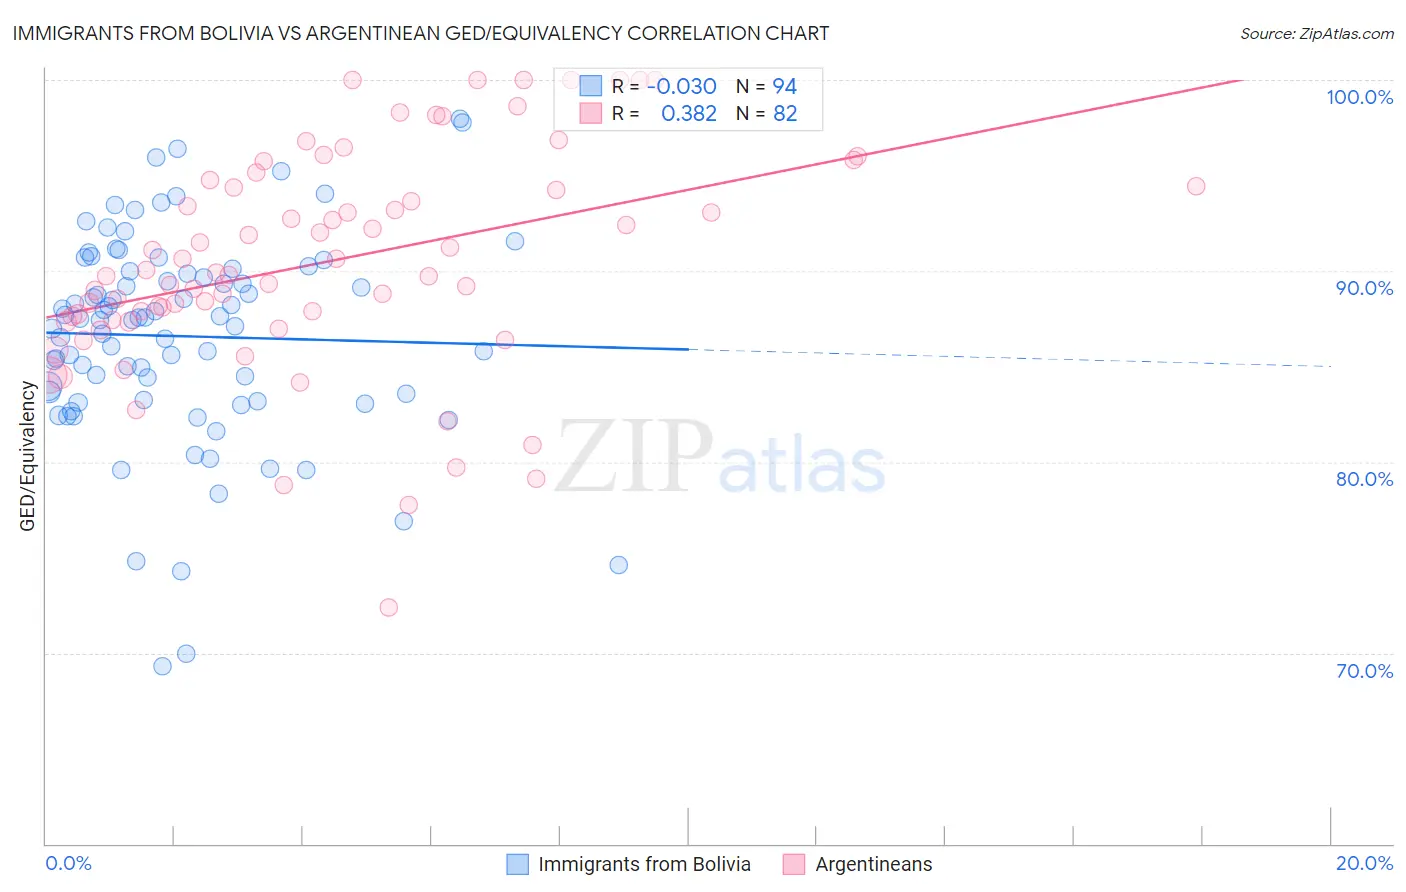 Immigrants from Bolivia vs Argentinean GED/Equivalency